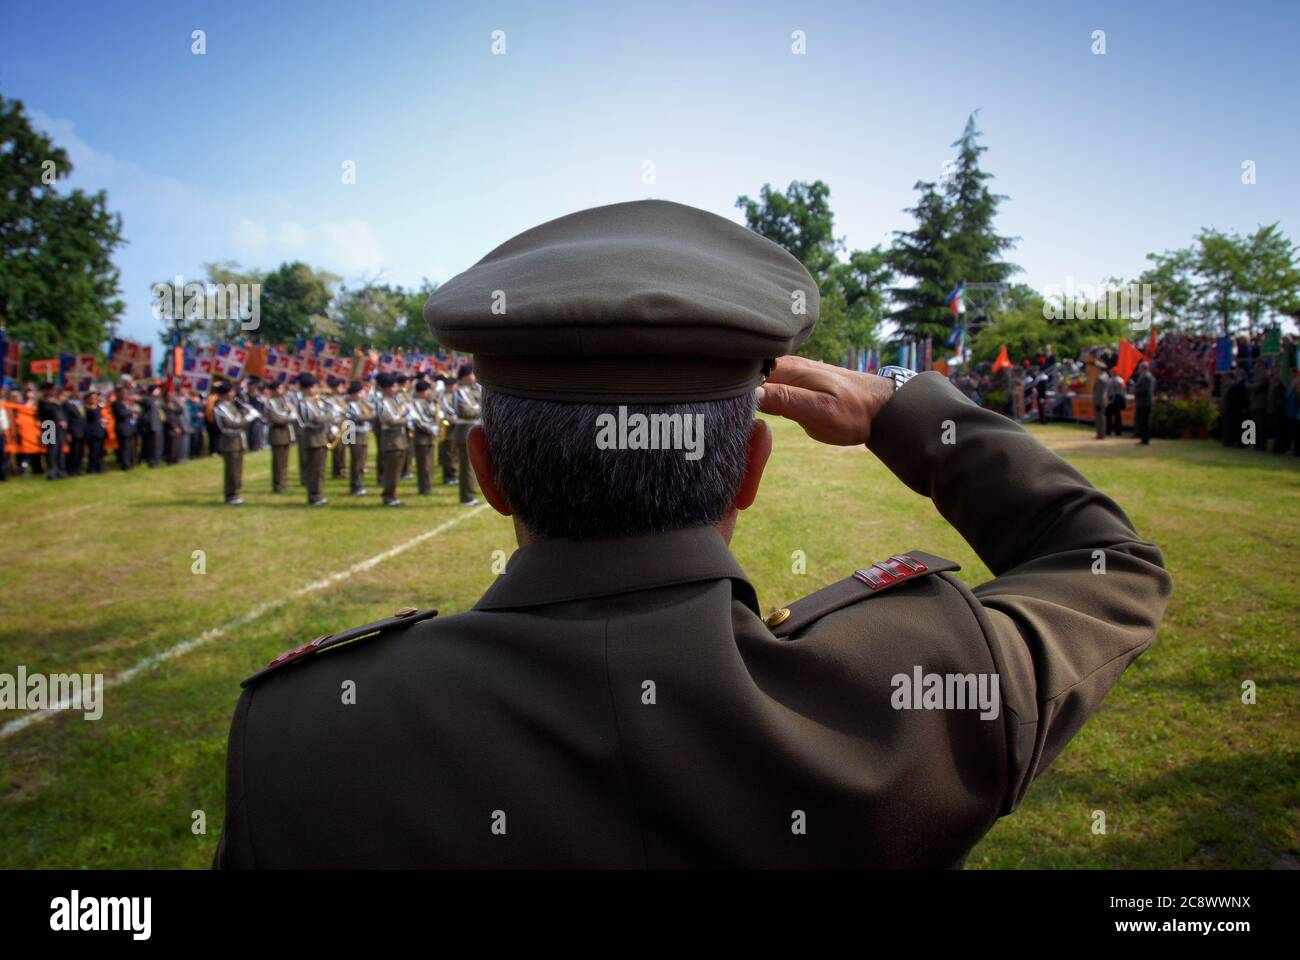 RIVAROLO, ITALY- MAY 5, 2009: Marshal at attention for the military salute during the XXVI military gathering of the Italian artillerymen Stock Photo